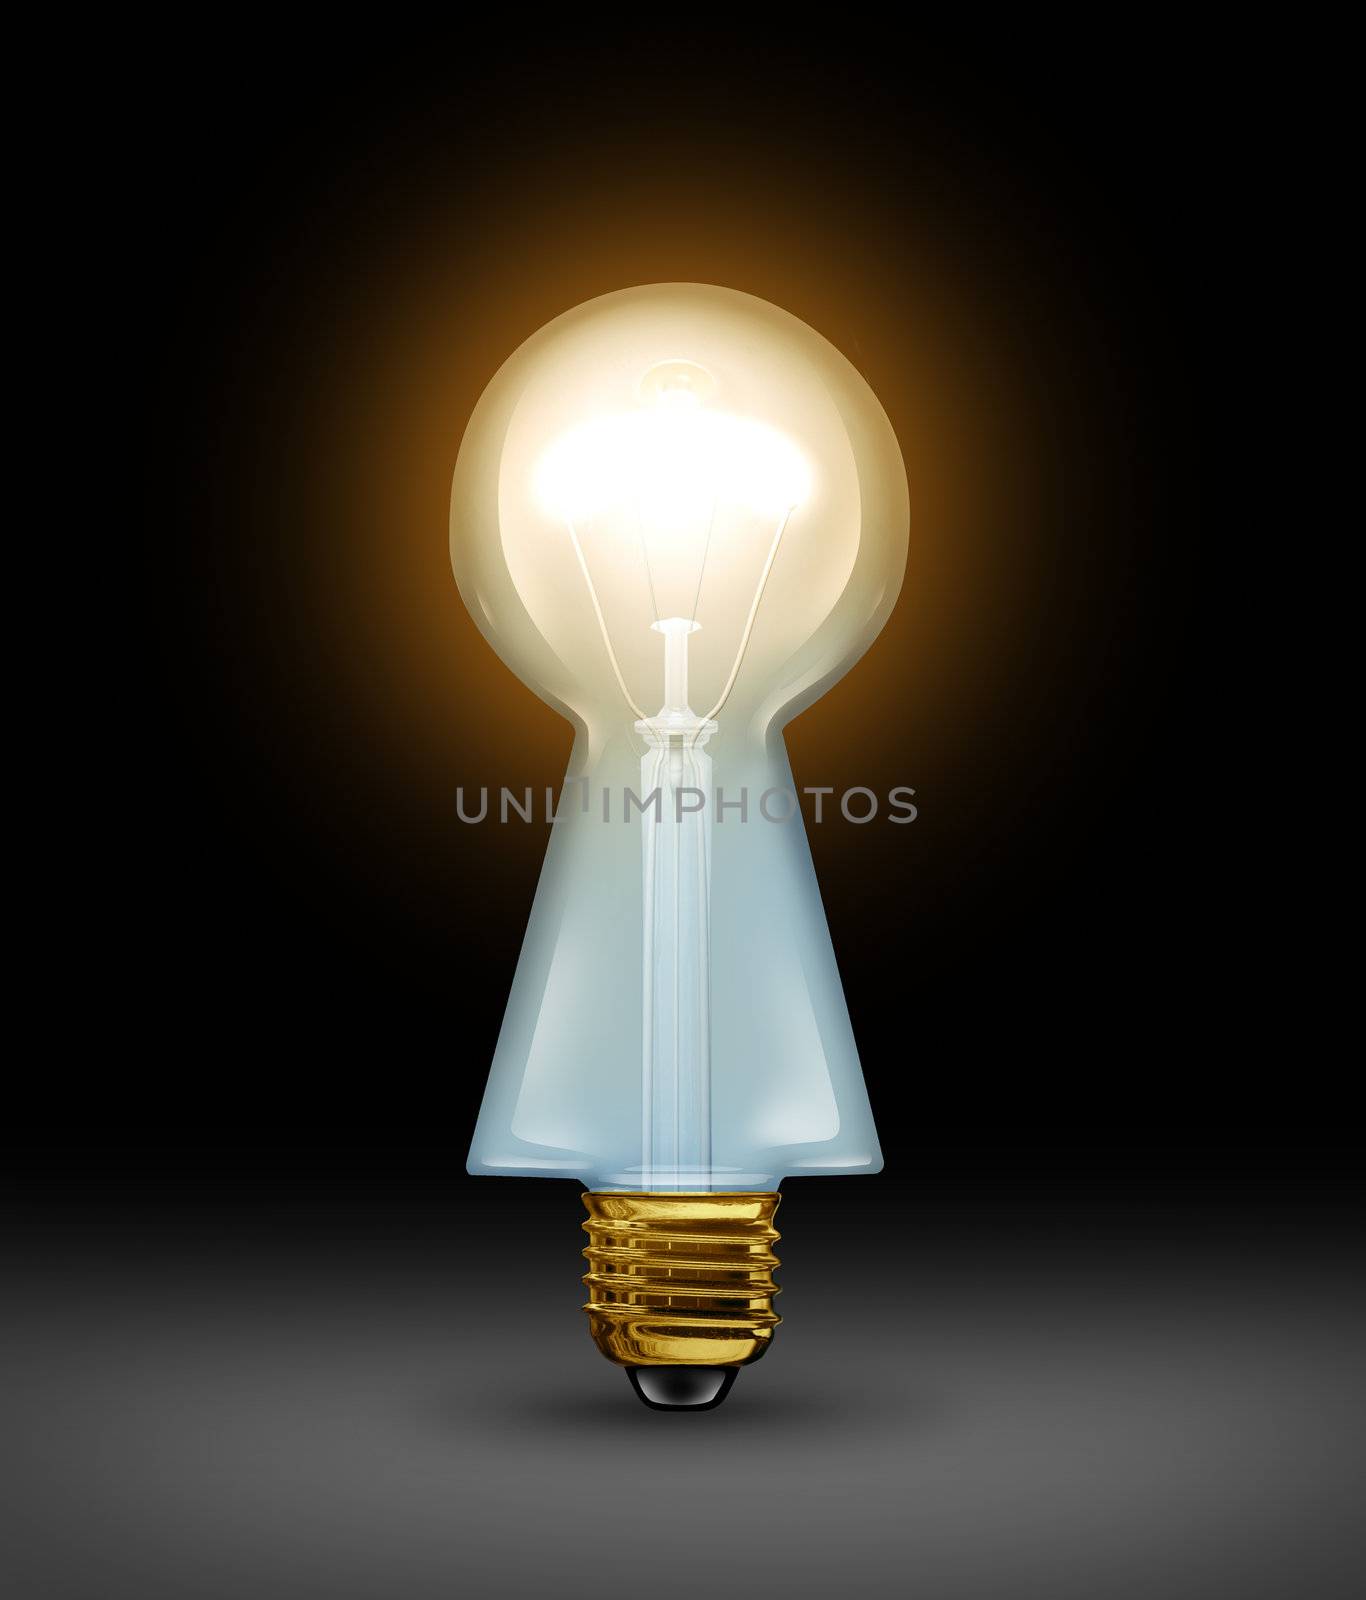 Intelligent answers and key ideas as brilliant business solutions concept with a light bulb in the shape of a keyhole on a black background as a concept of a creative key and expert guidance.